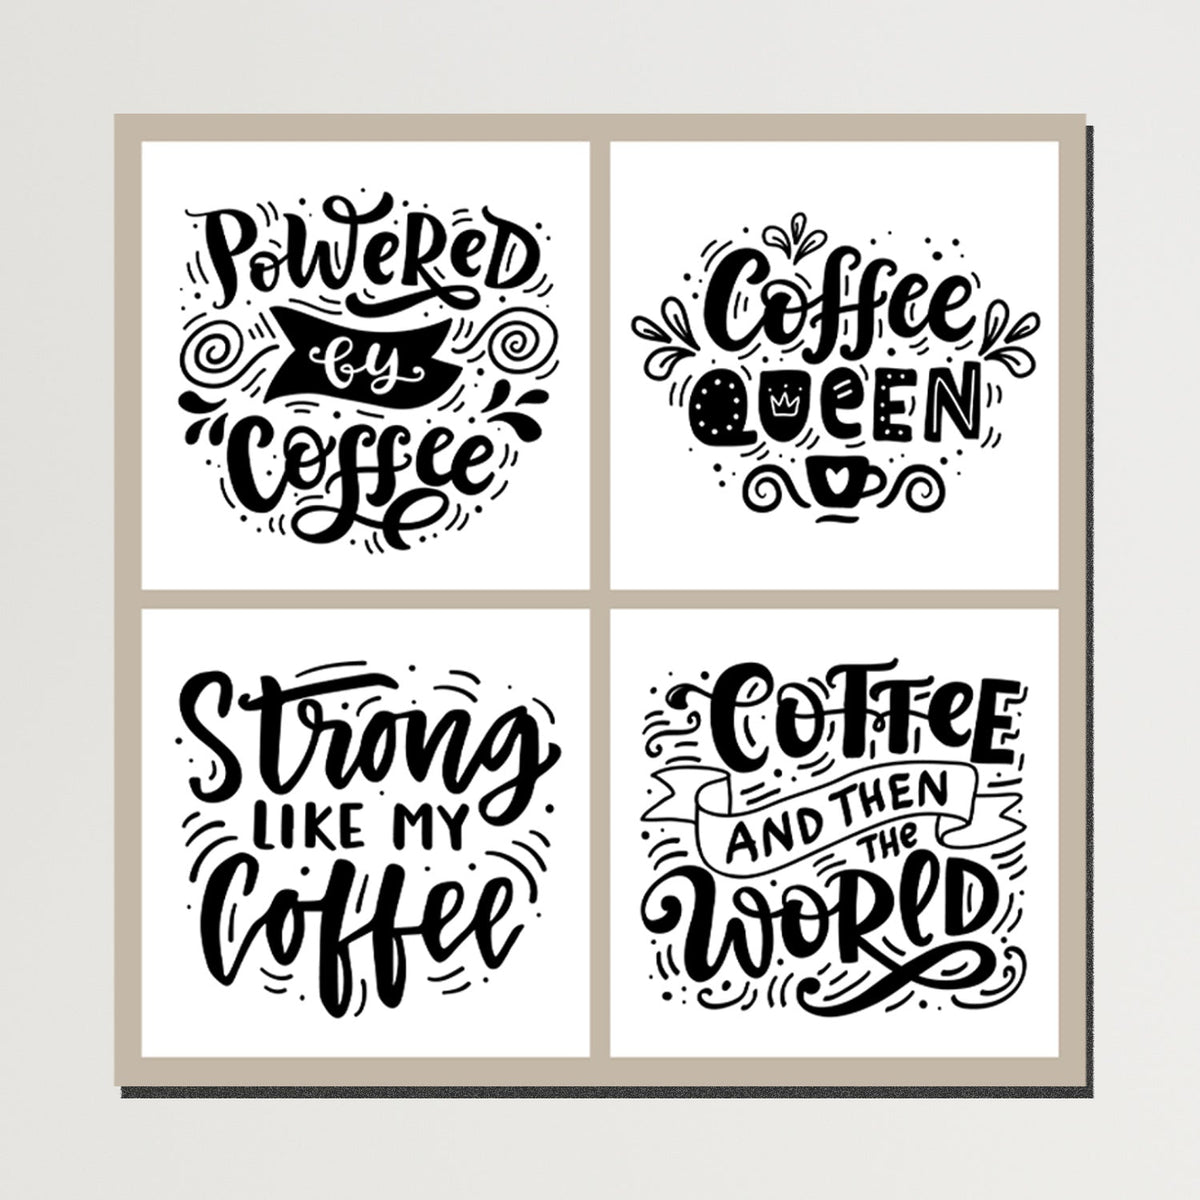 https://cdn.shopify.com/s/files/1/0387/9986/8044/products/CoffeeQueenPosterCanvasArtprintStretched-Plain.jpg